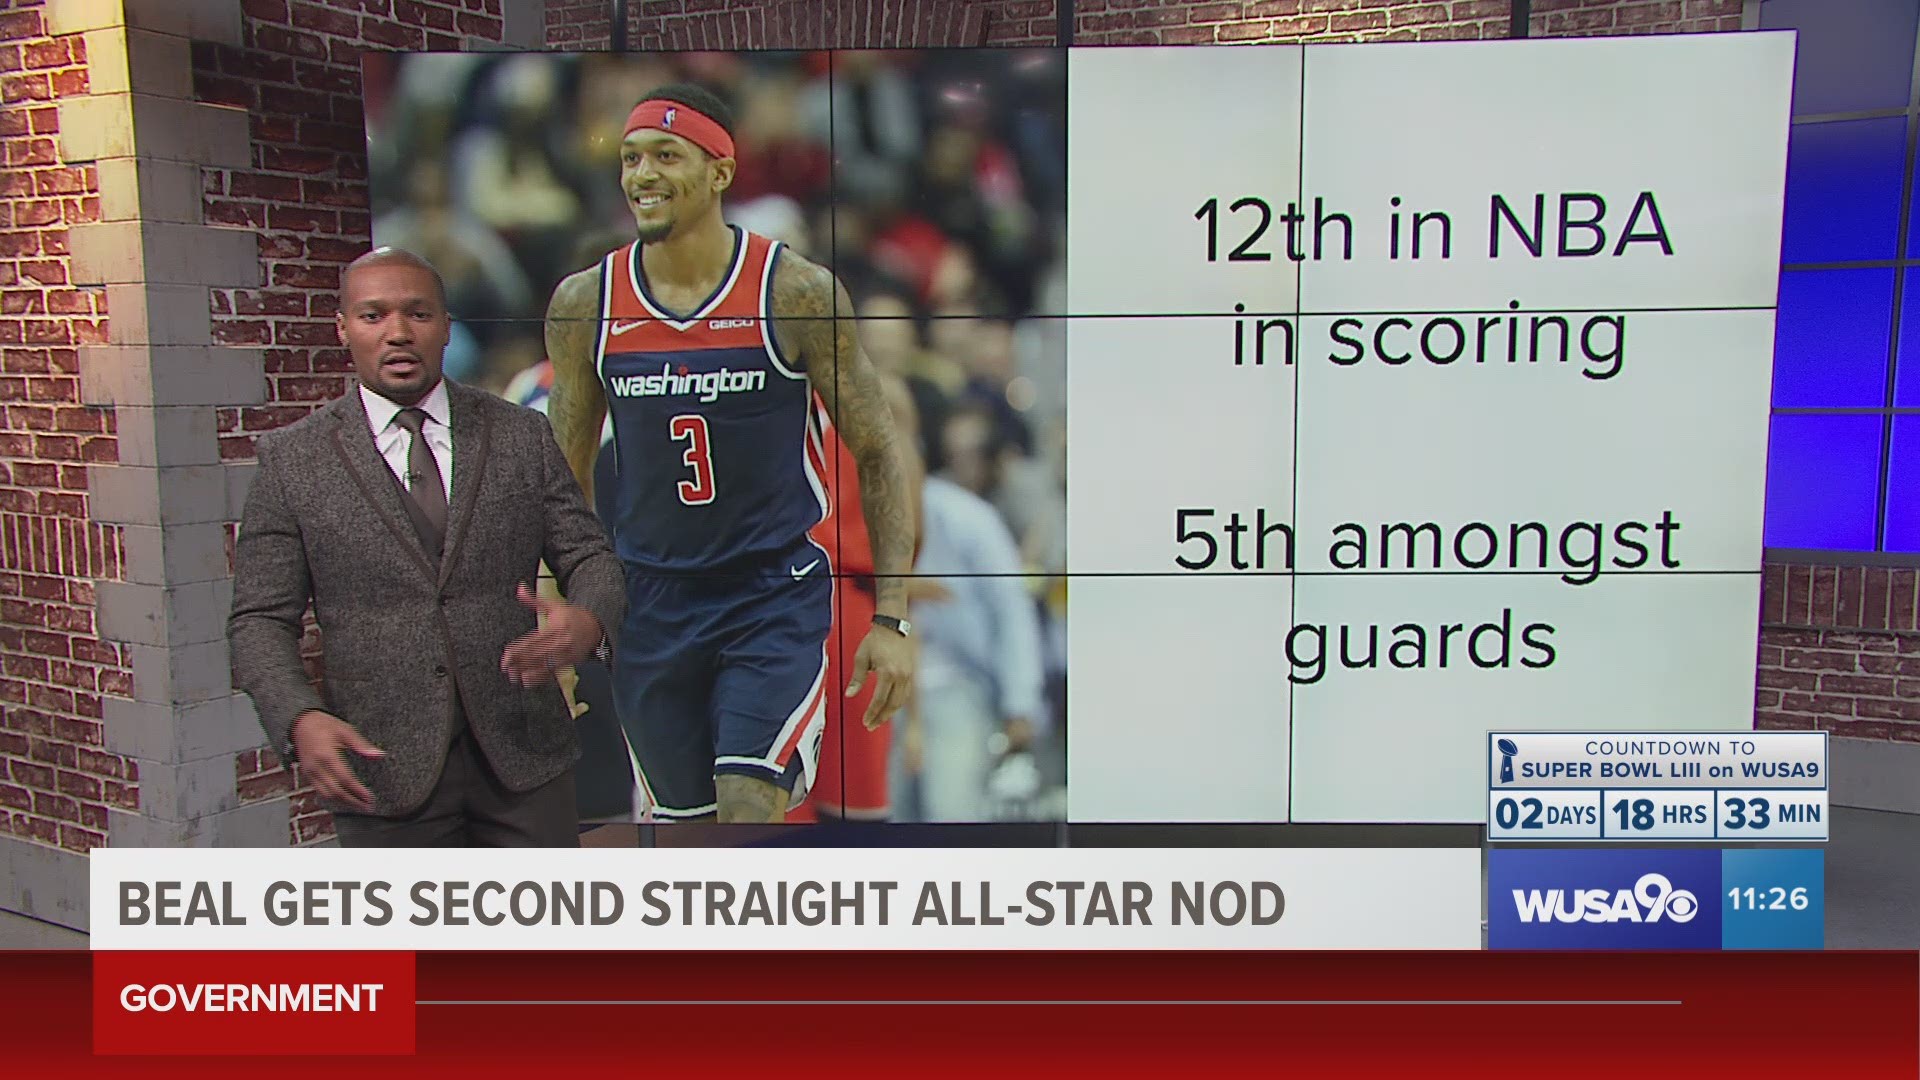 Wizards guard Bradley Beal was selected for the NBA All-Star game for the second time in his career.